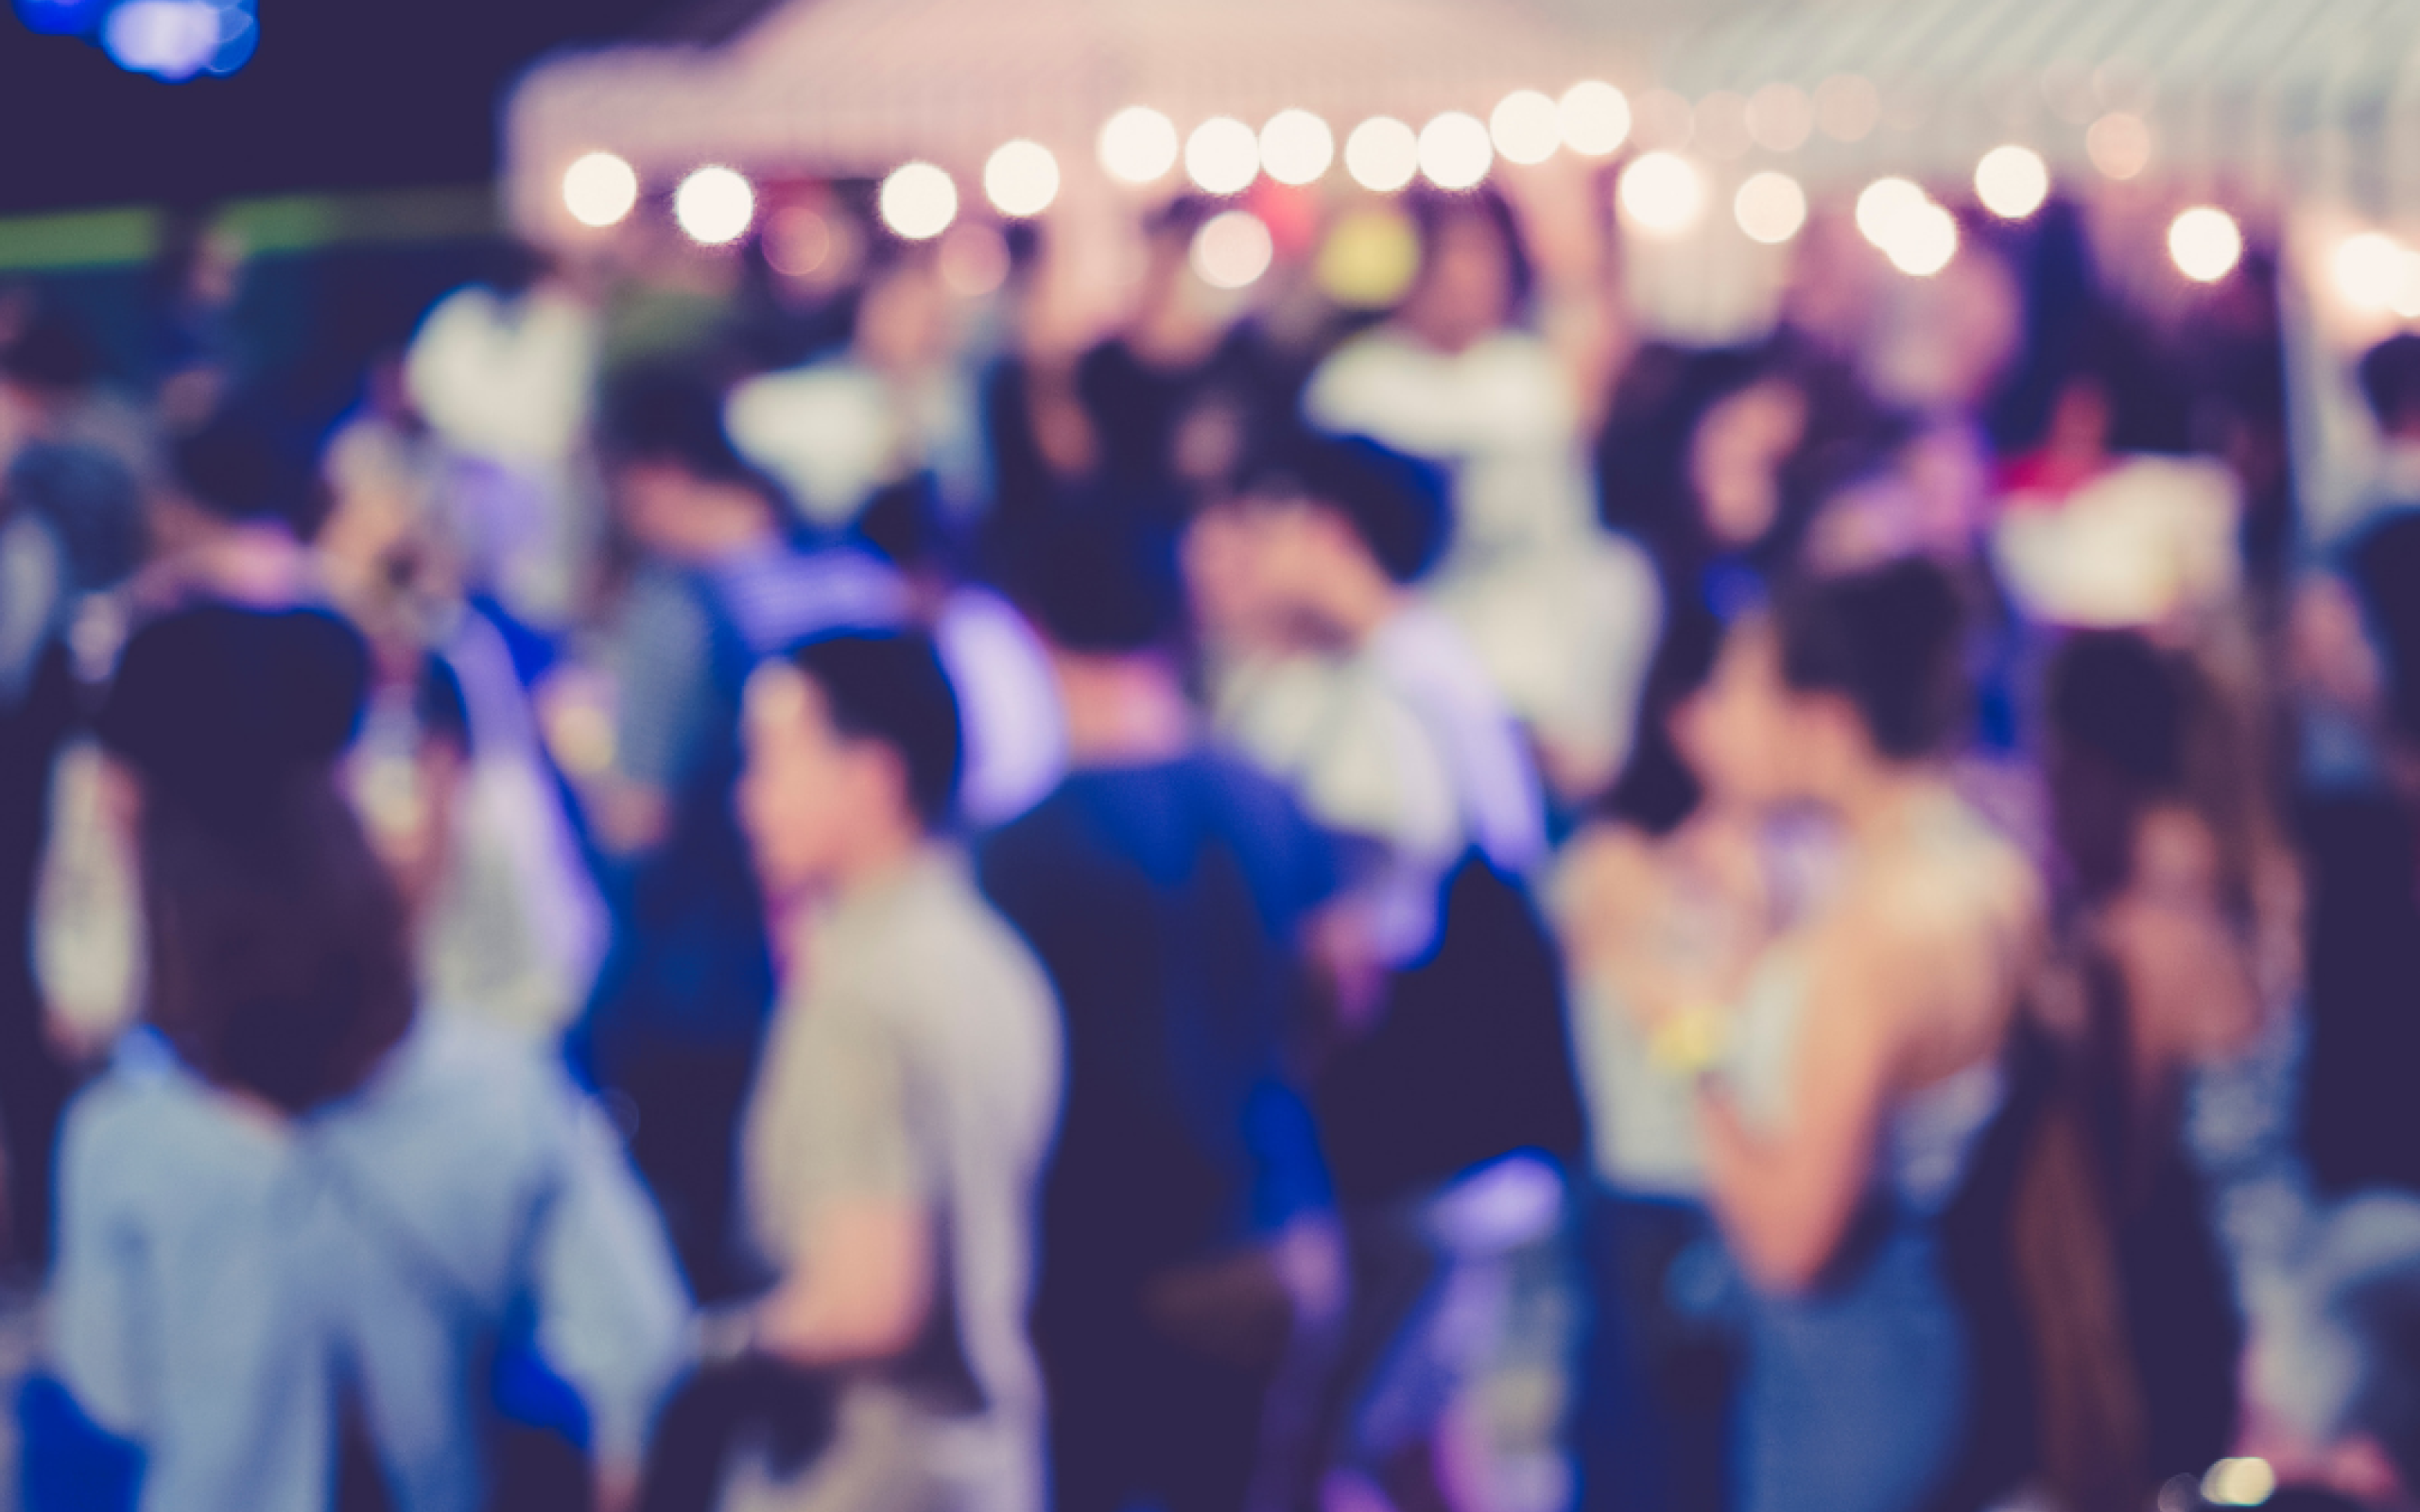 blurry crowd of event goers hangs out under string lights